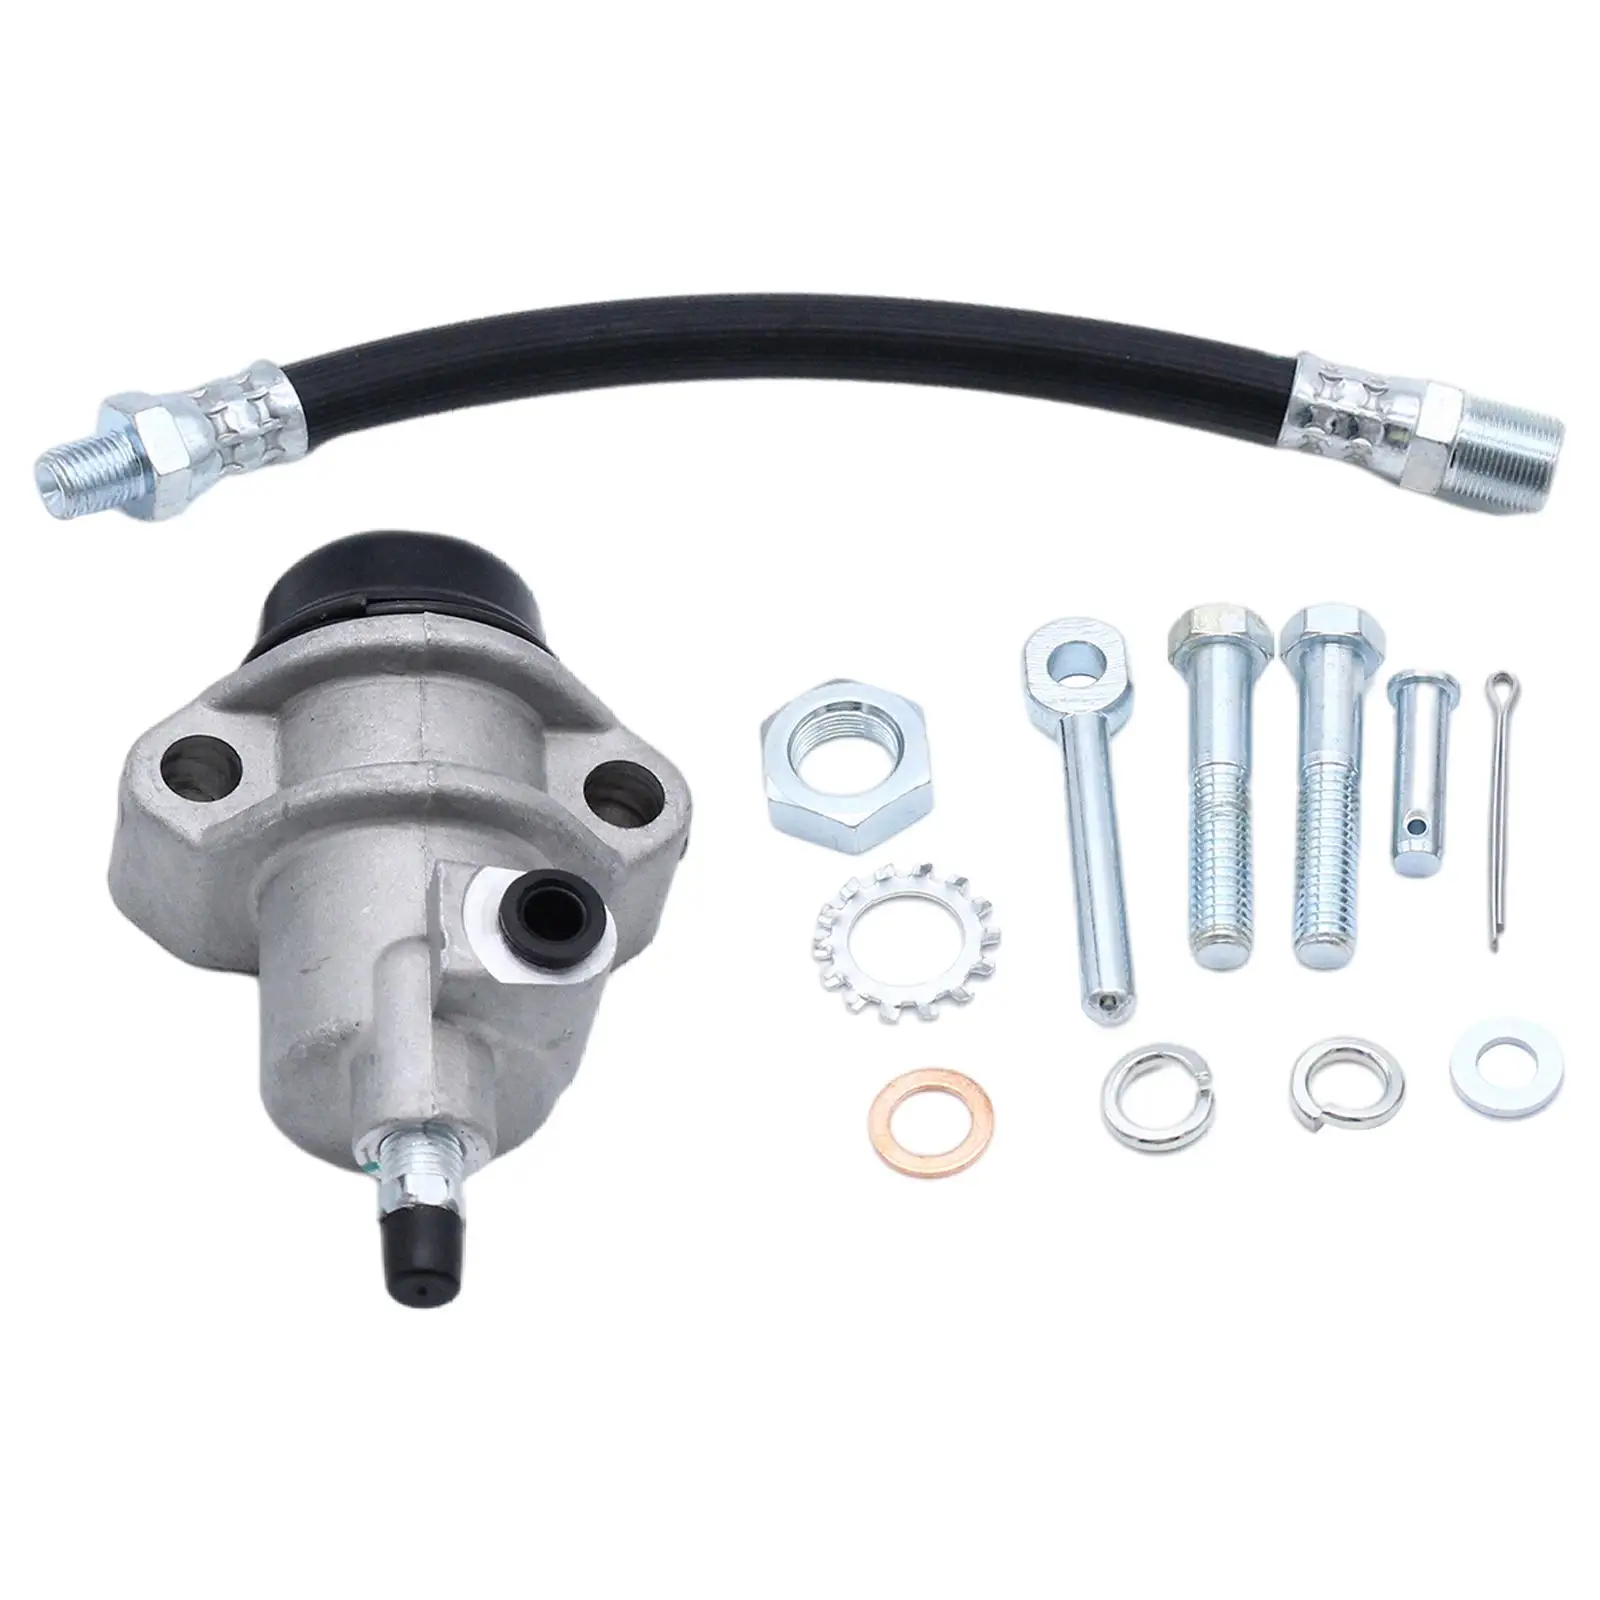 Clutch Slave Cylinder Gsy106 Clutch Pump 1.8L Master Cylinder Fit for MG 1800 Convertible